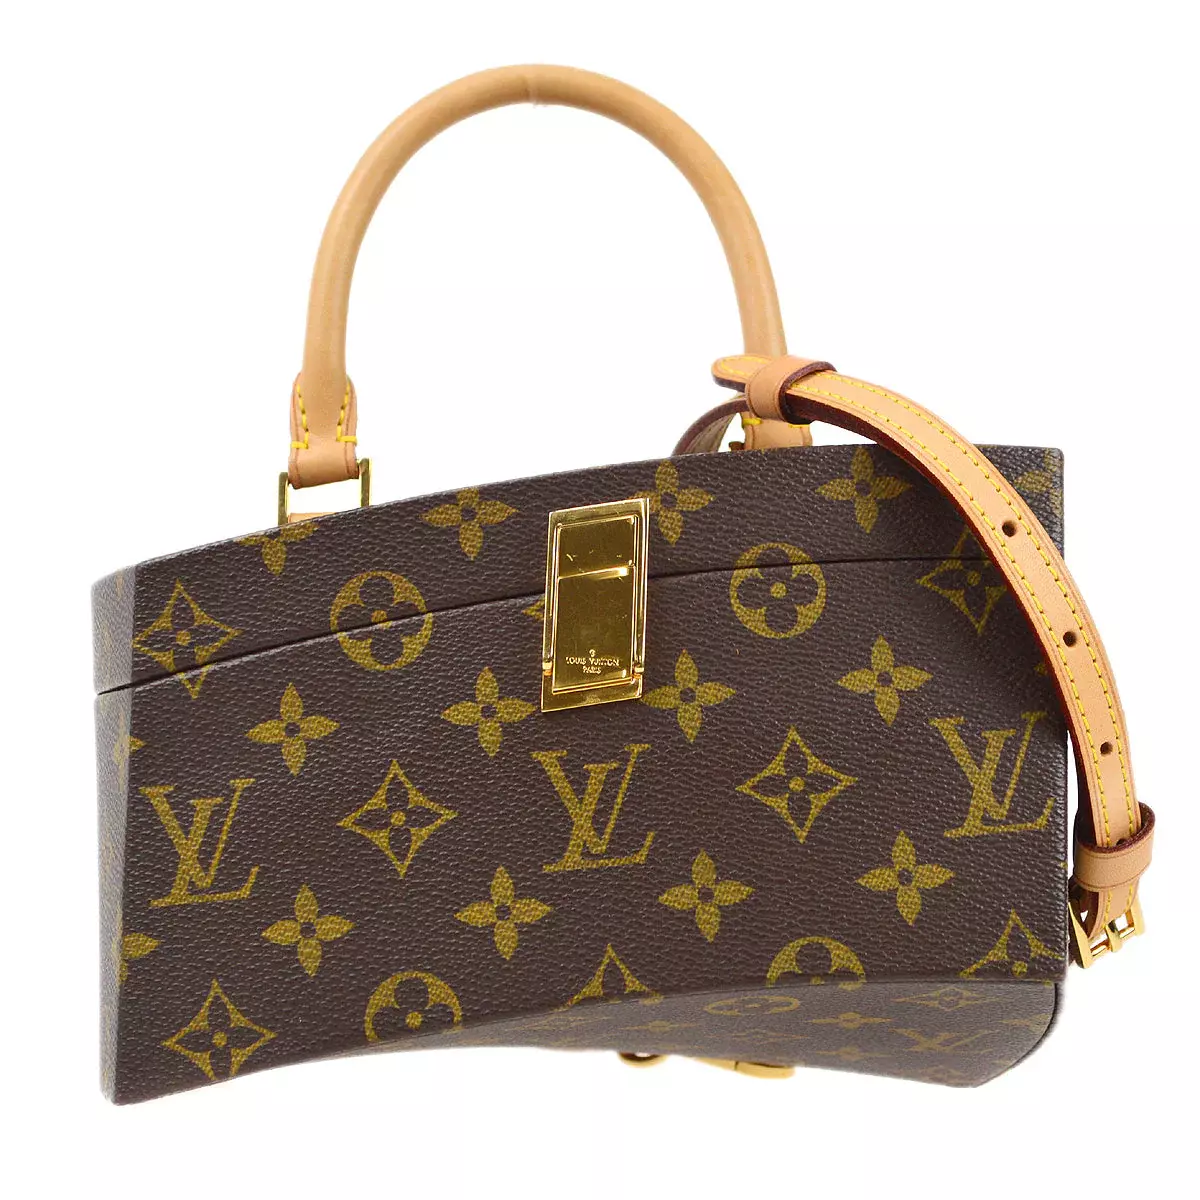 Louis Vuitton Monogram Frank Gehry Twisted Box Bag - Brown